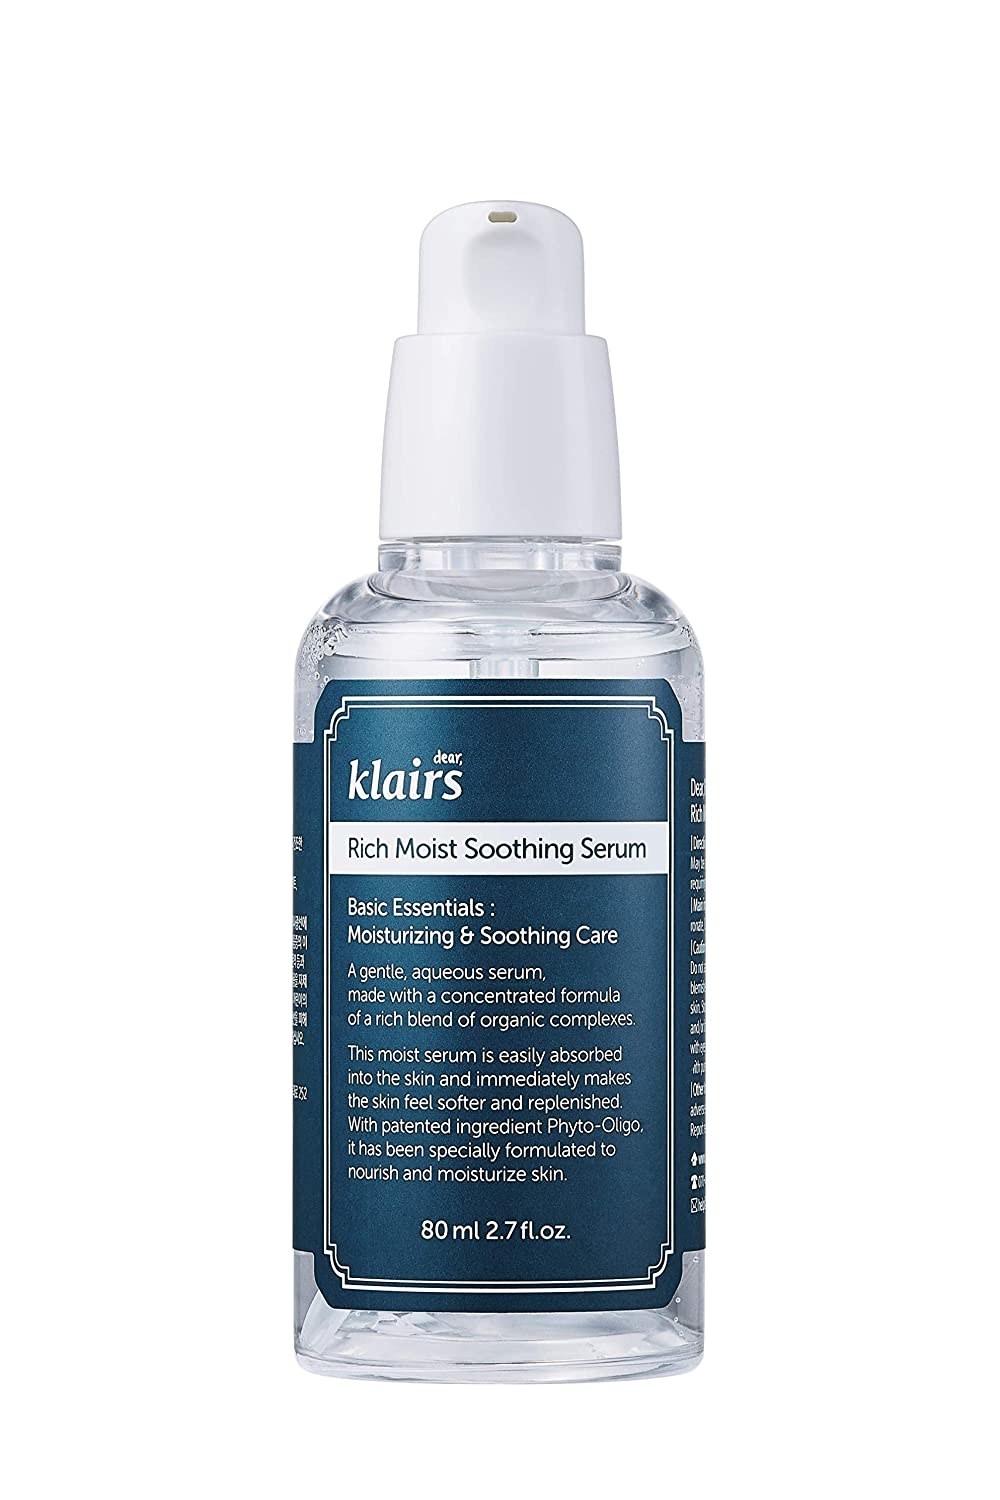 Rich Moist Soothing Serum by Klairs